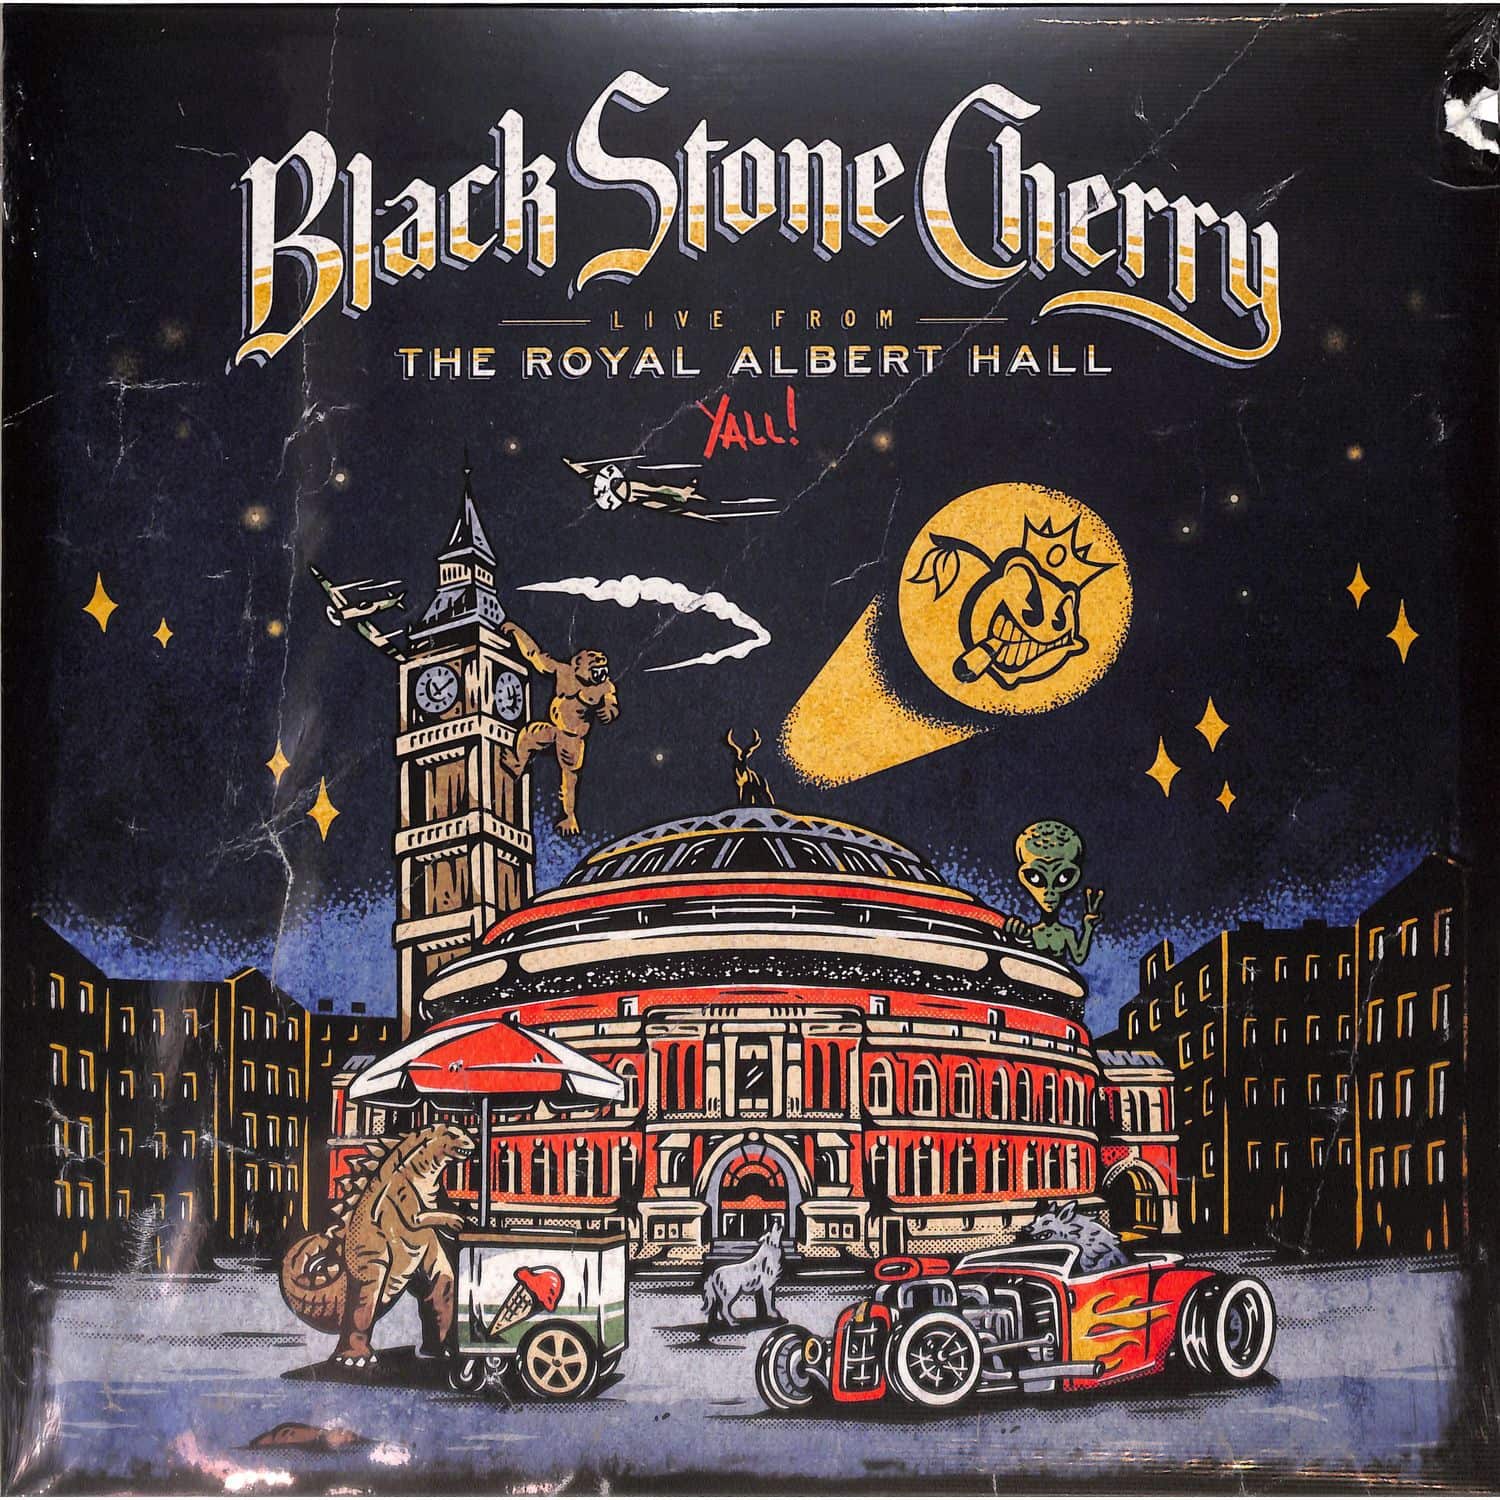 Black Stone Cherry - LIVE FROM THE ROYAL ALBERT HALL...Y ALL! 